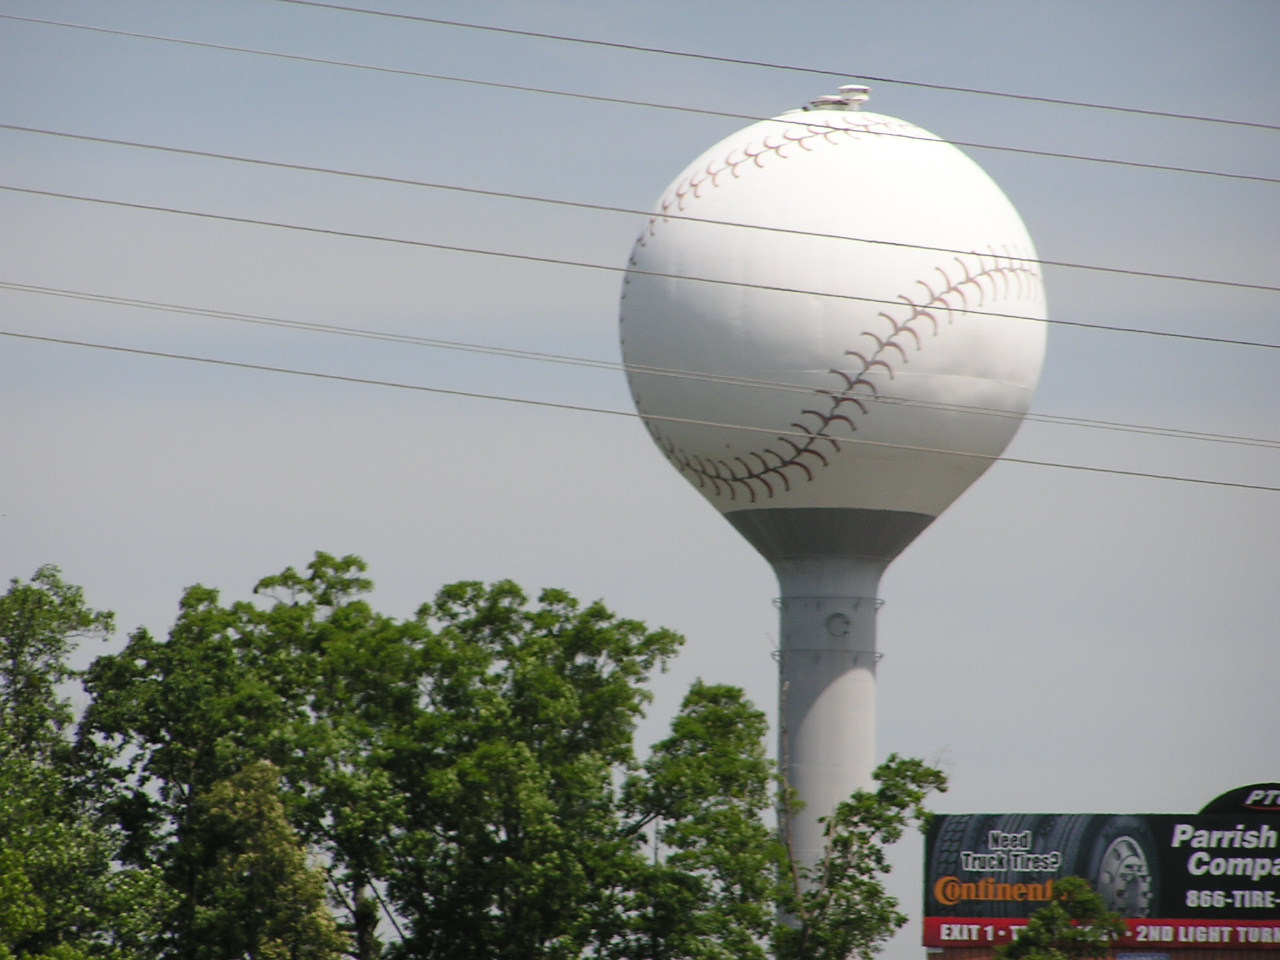 The Watertower at the Exit in Fort Mill, SC